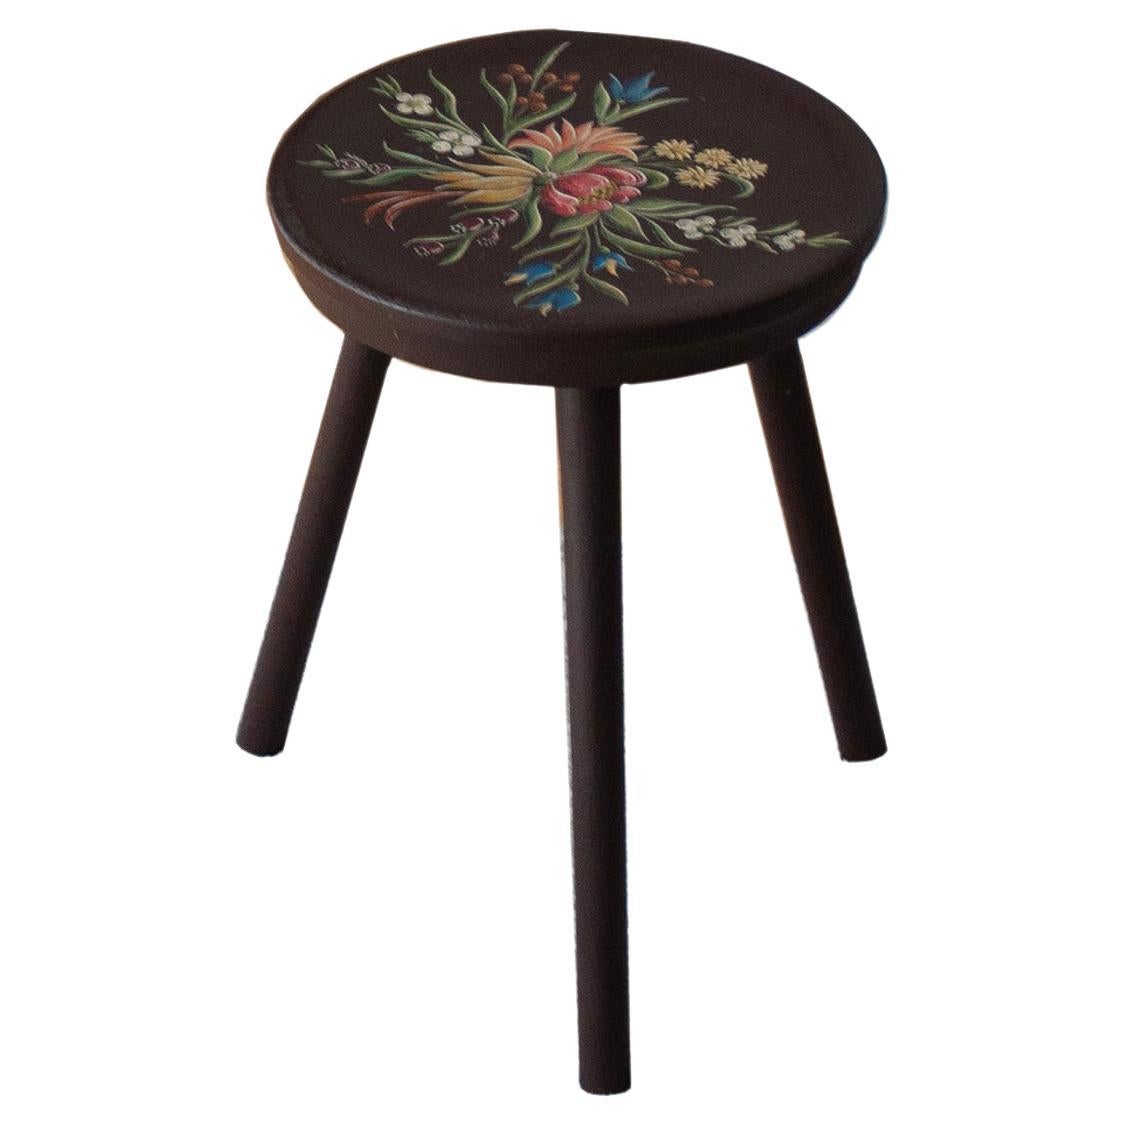 Primitive Hand Painted Wooden Stool, Round Three Legged, Floral Motive